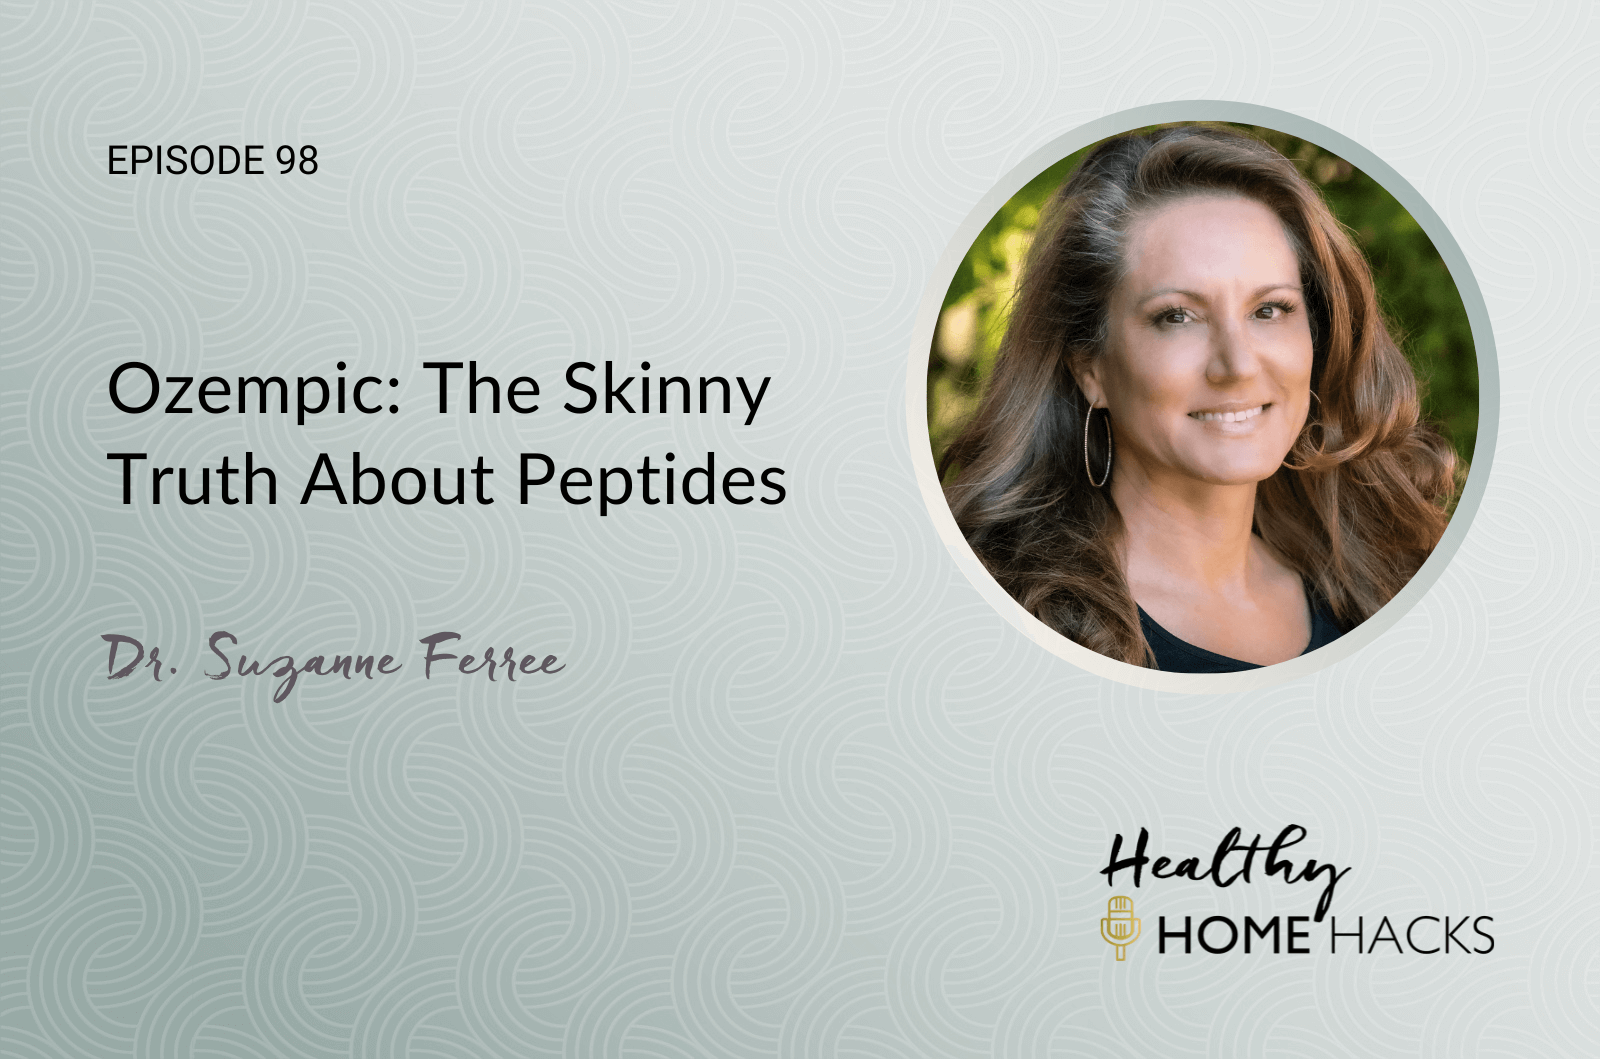 Ozempic: The Skinny Truth About Peptides